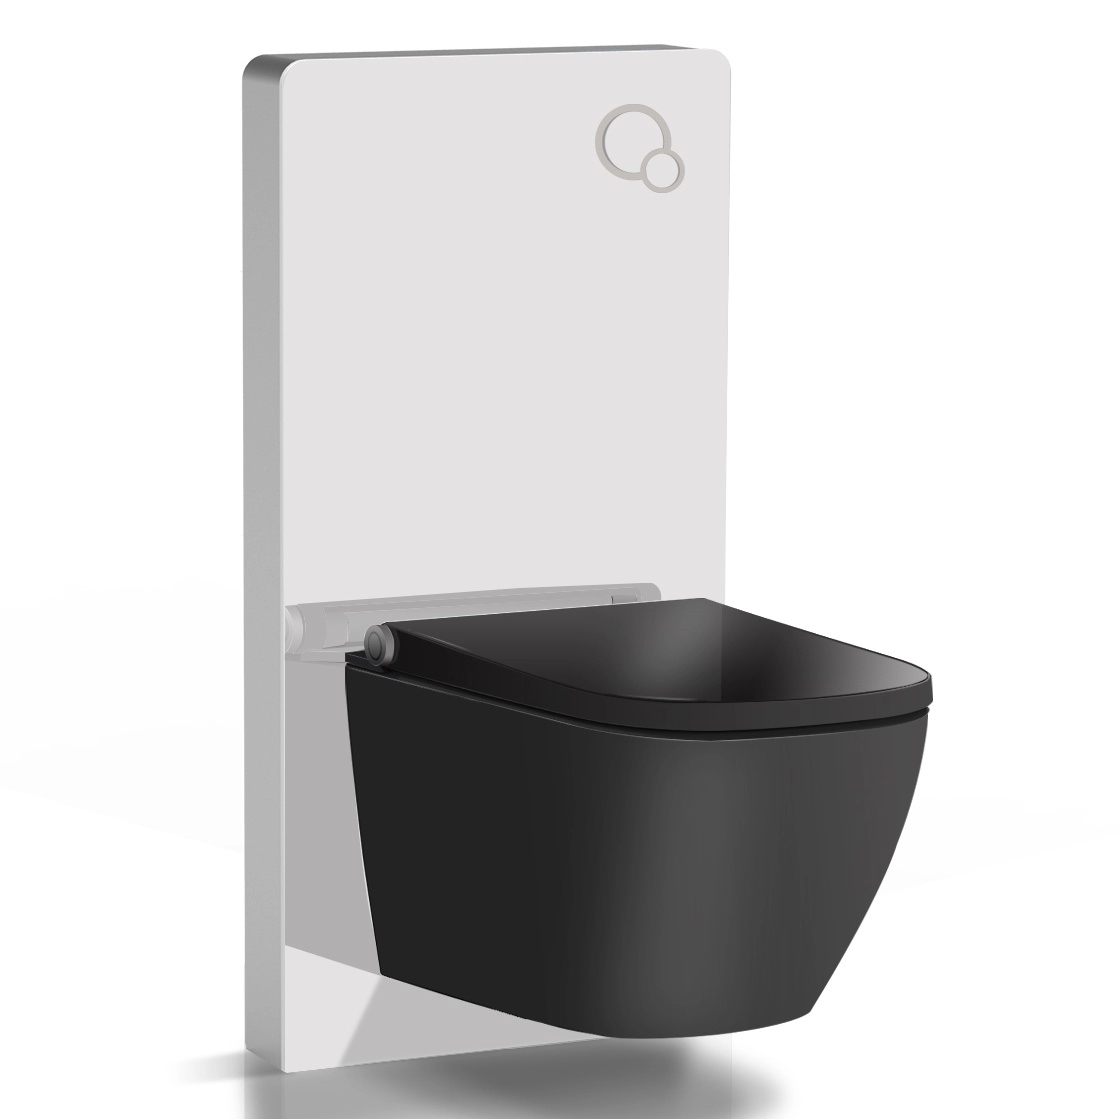 Black Color Smart Toilet with innovative functions that are tailored to your personal needs